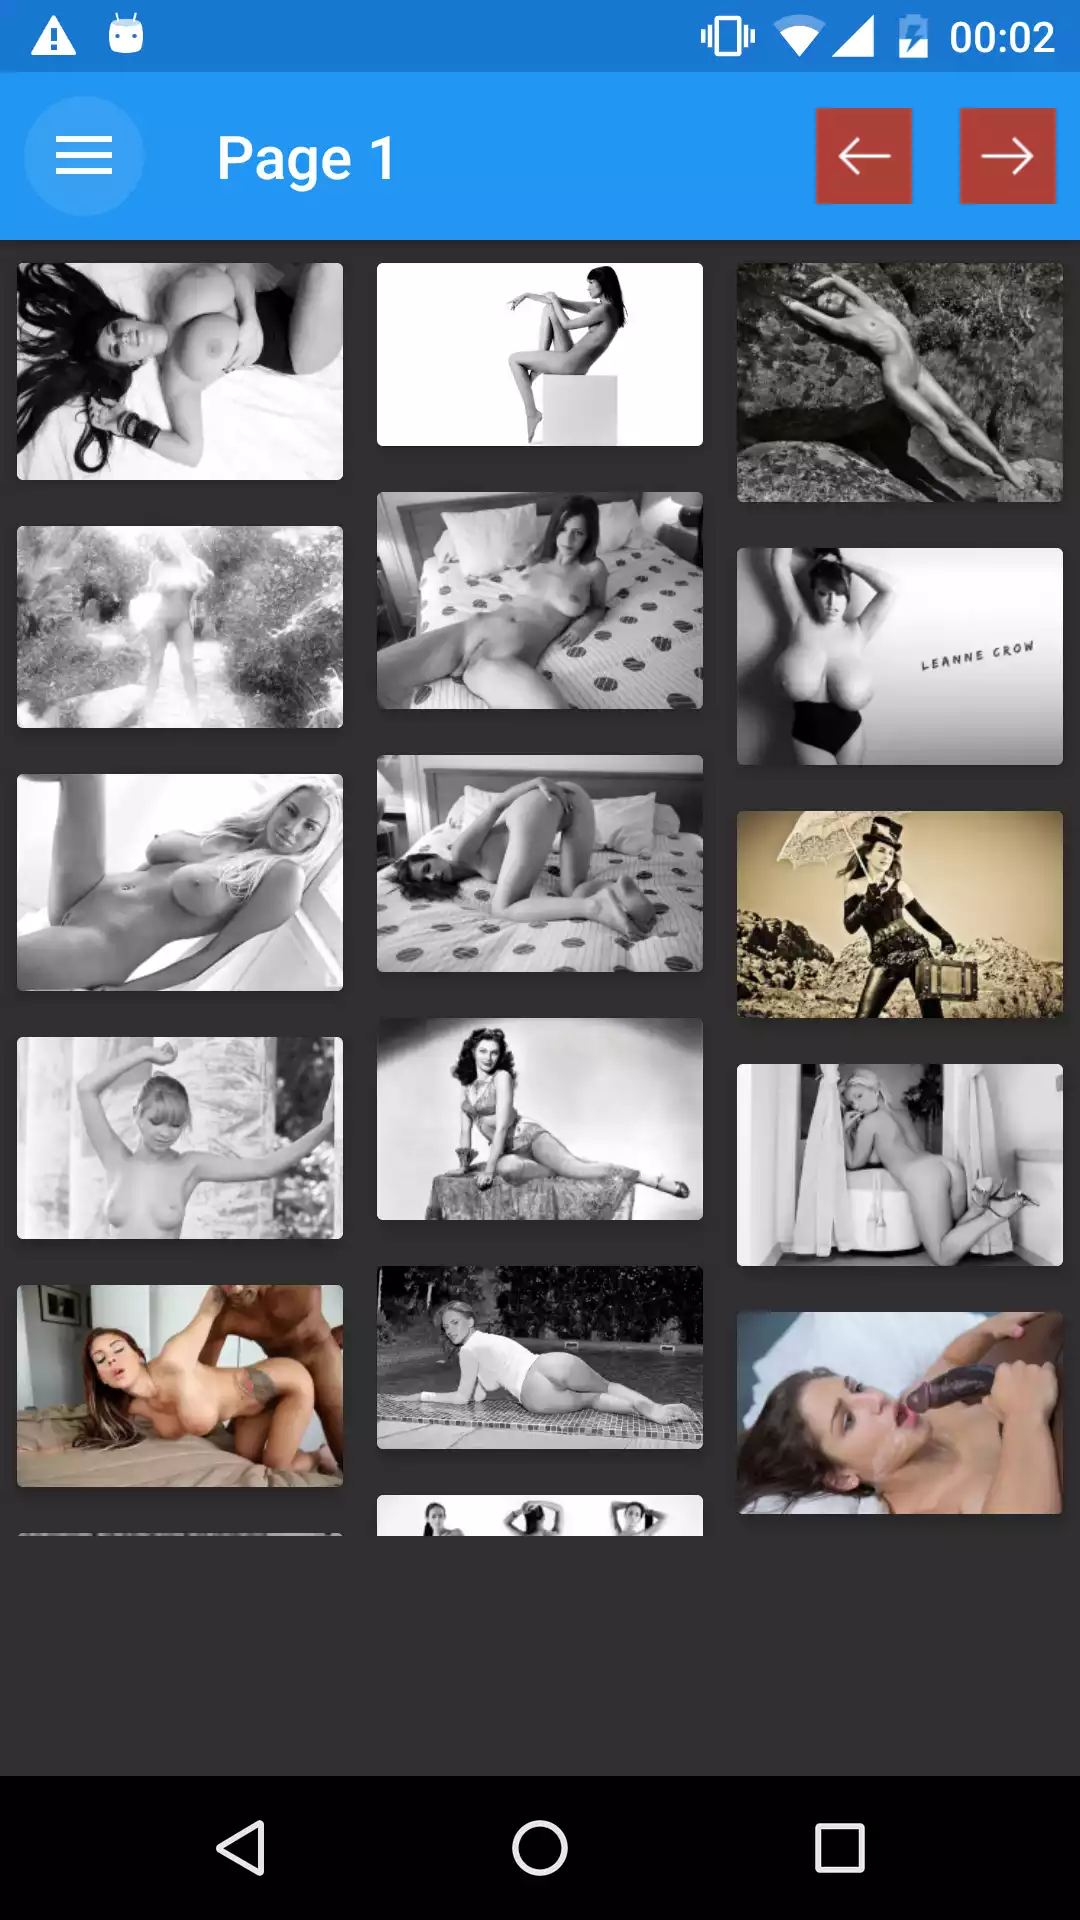 Black and White watching,sex,for,apk,pornostar,hot,galleries,wallpapers,pornstar,updates,picture,downloader,erotic,манга,hentai,download,gallery,app,wallpaper,sexy,porn,pegging,pics,excuses,backgrounds,best,страпон